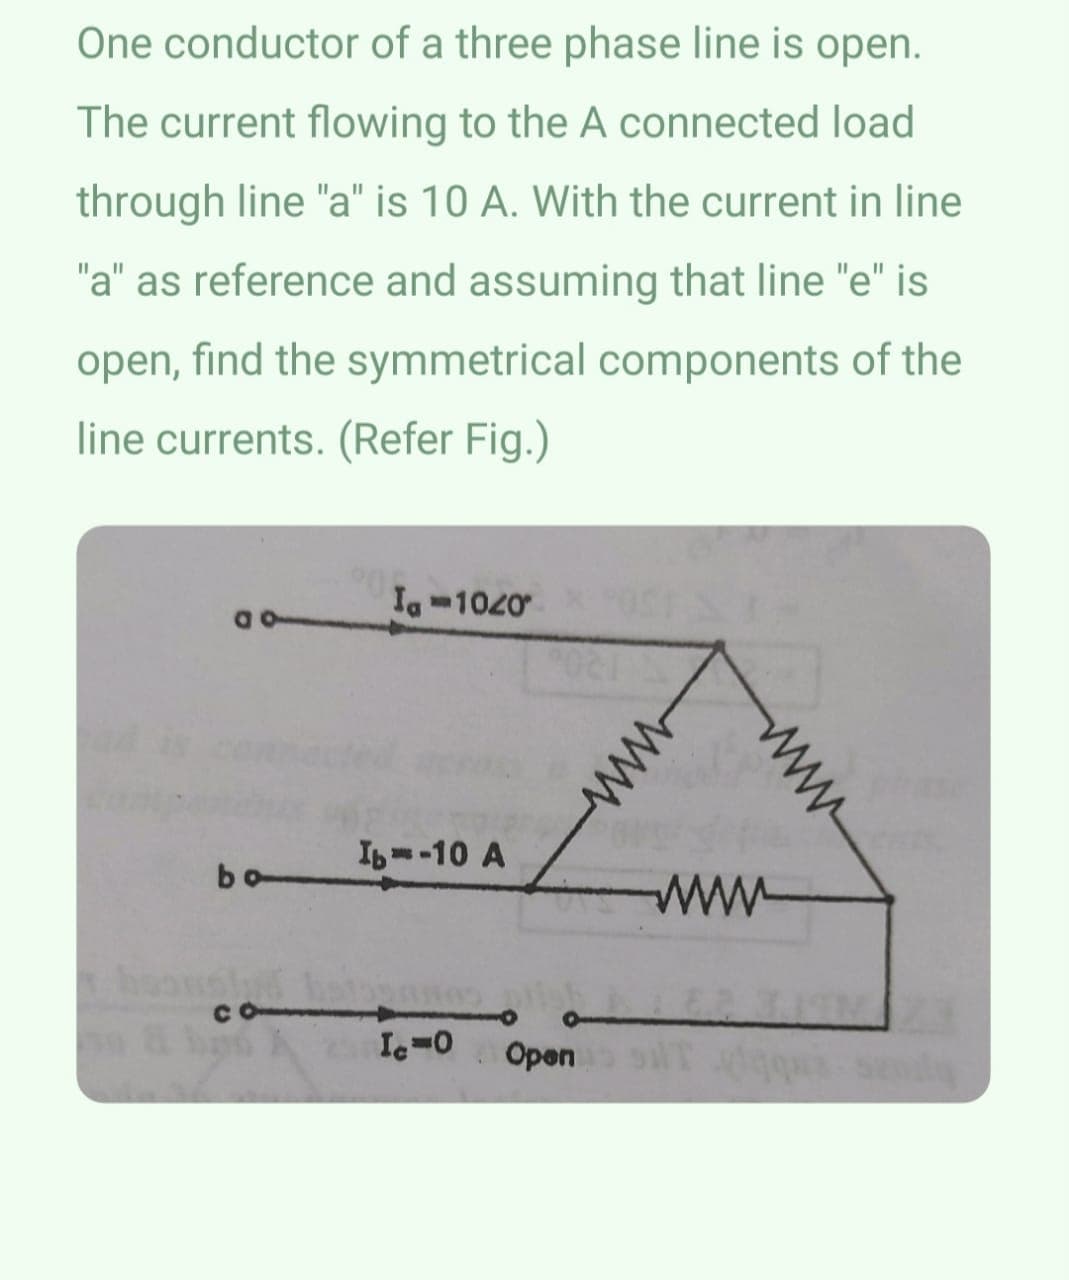 One conductor of a three phase line is open.
The current flowing to the A connected load
through line "a" is 10 A. With the current in line
"a" as reference and assuming that line "e" is
open, find the symmetrical components of the
line currents. (Refer Fig.)
a o
bo
hould
Ia-1020
Ib-10 A
IC=0 Open
www
www
www